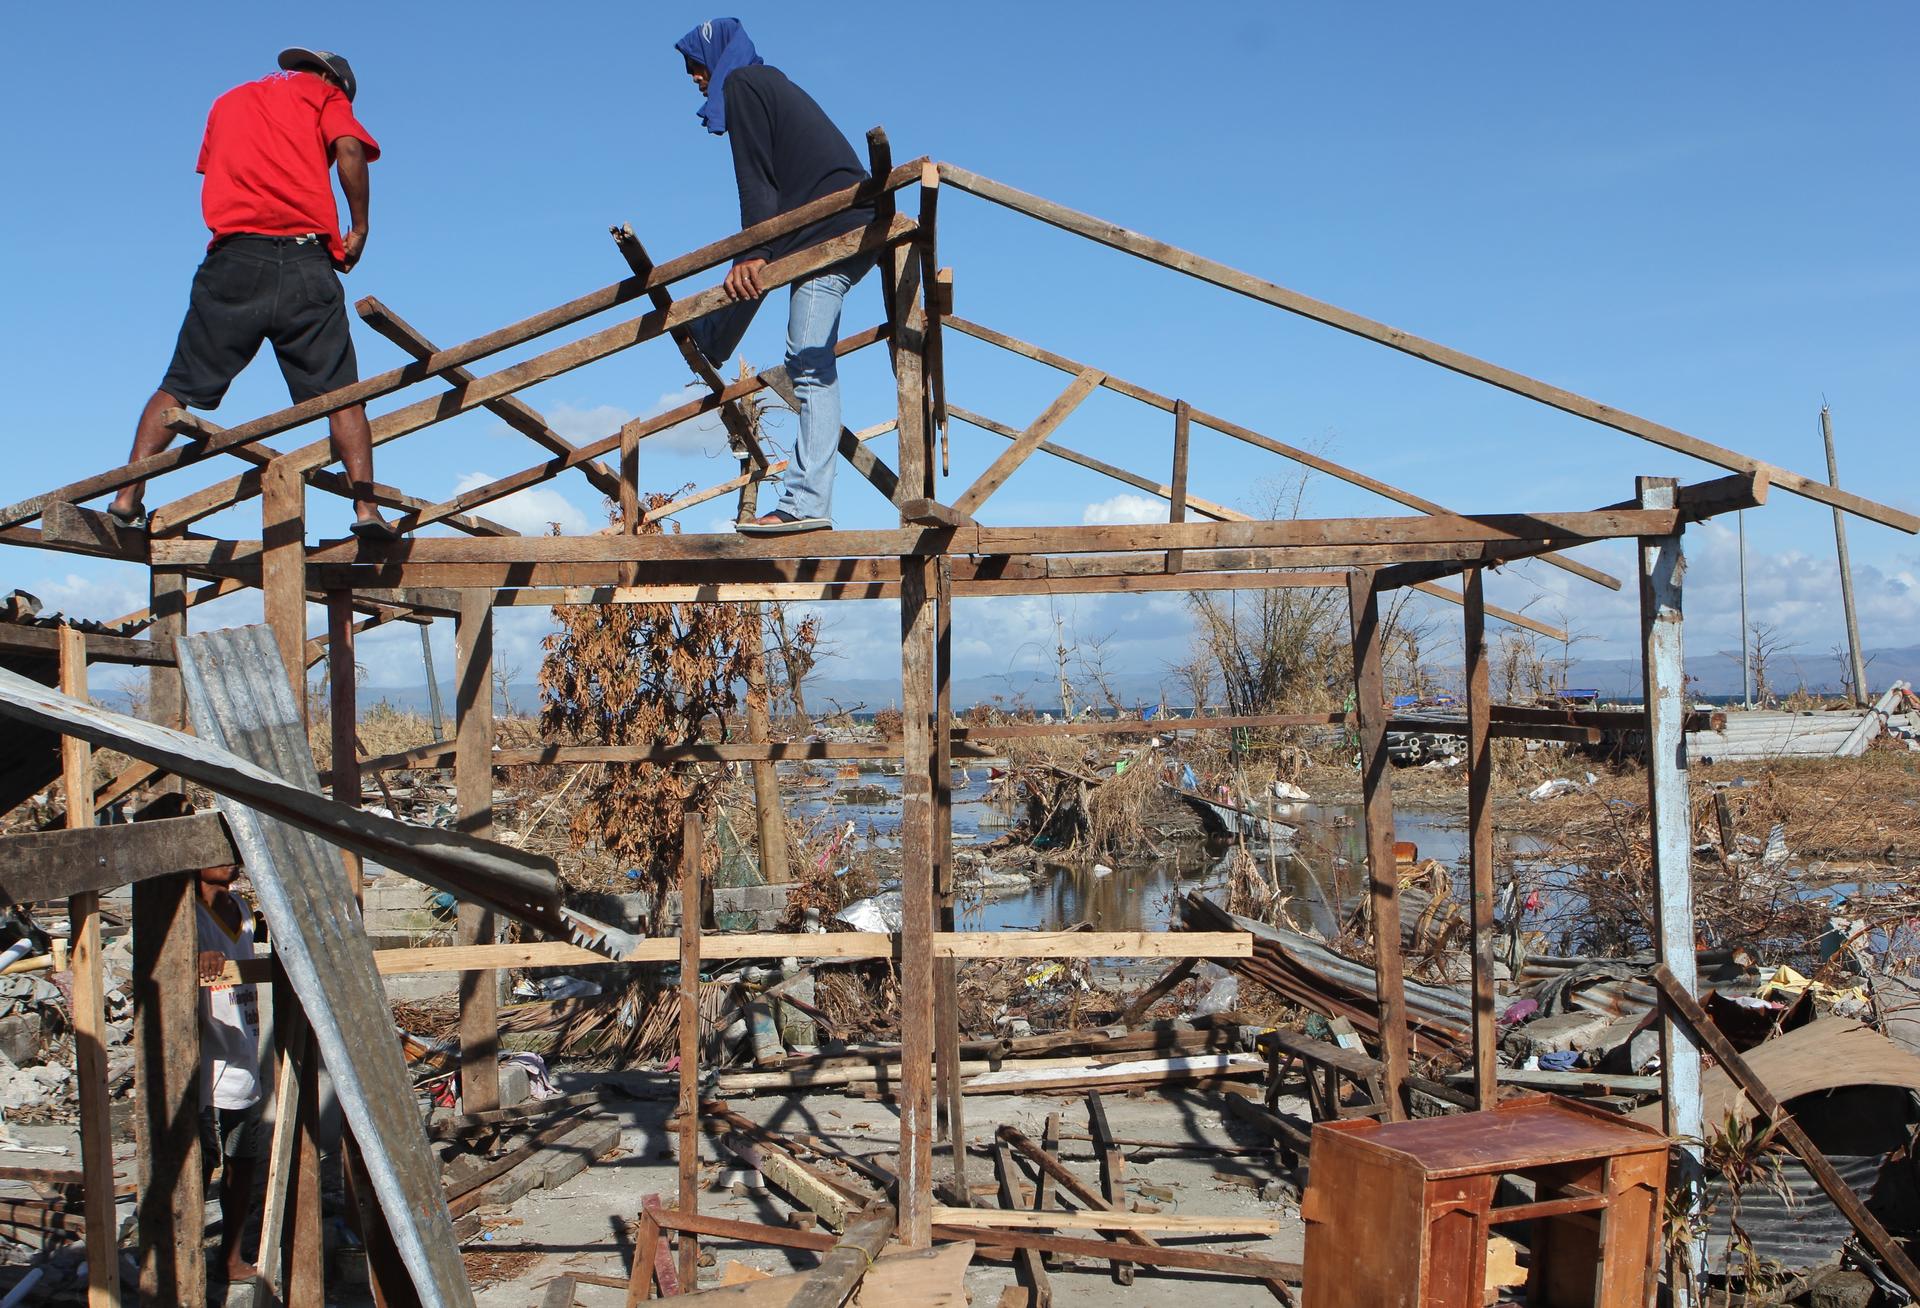 The Vergara family is rebuilding a home on the site of the one devastated by Typhoon Haiyan, using lumber and corrugated tin gathered from the wreckage. 